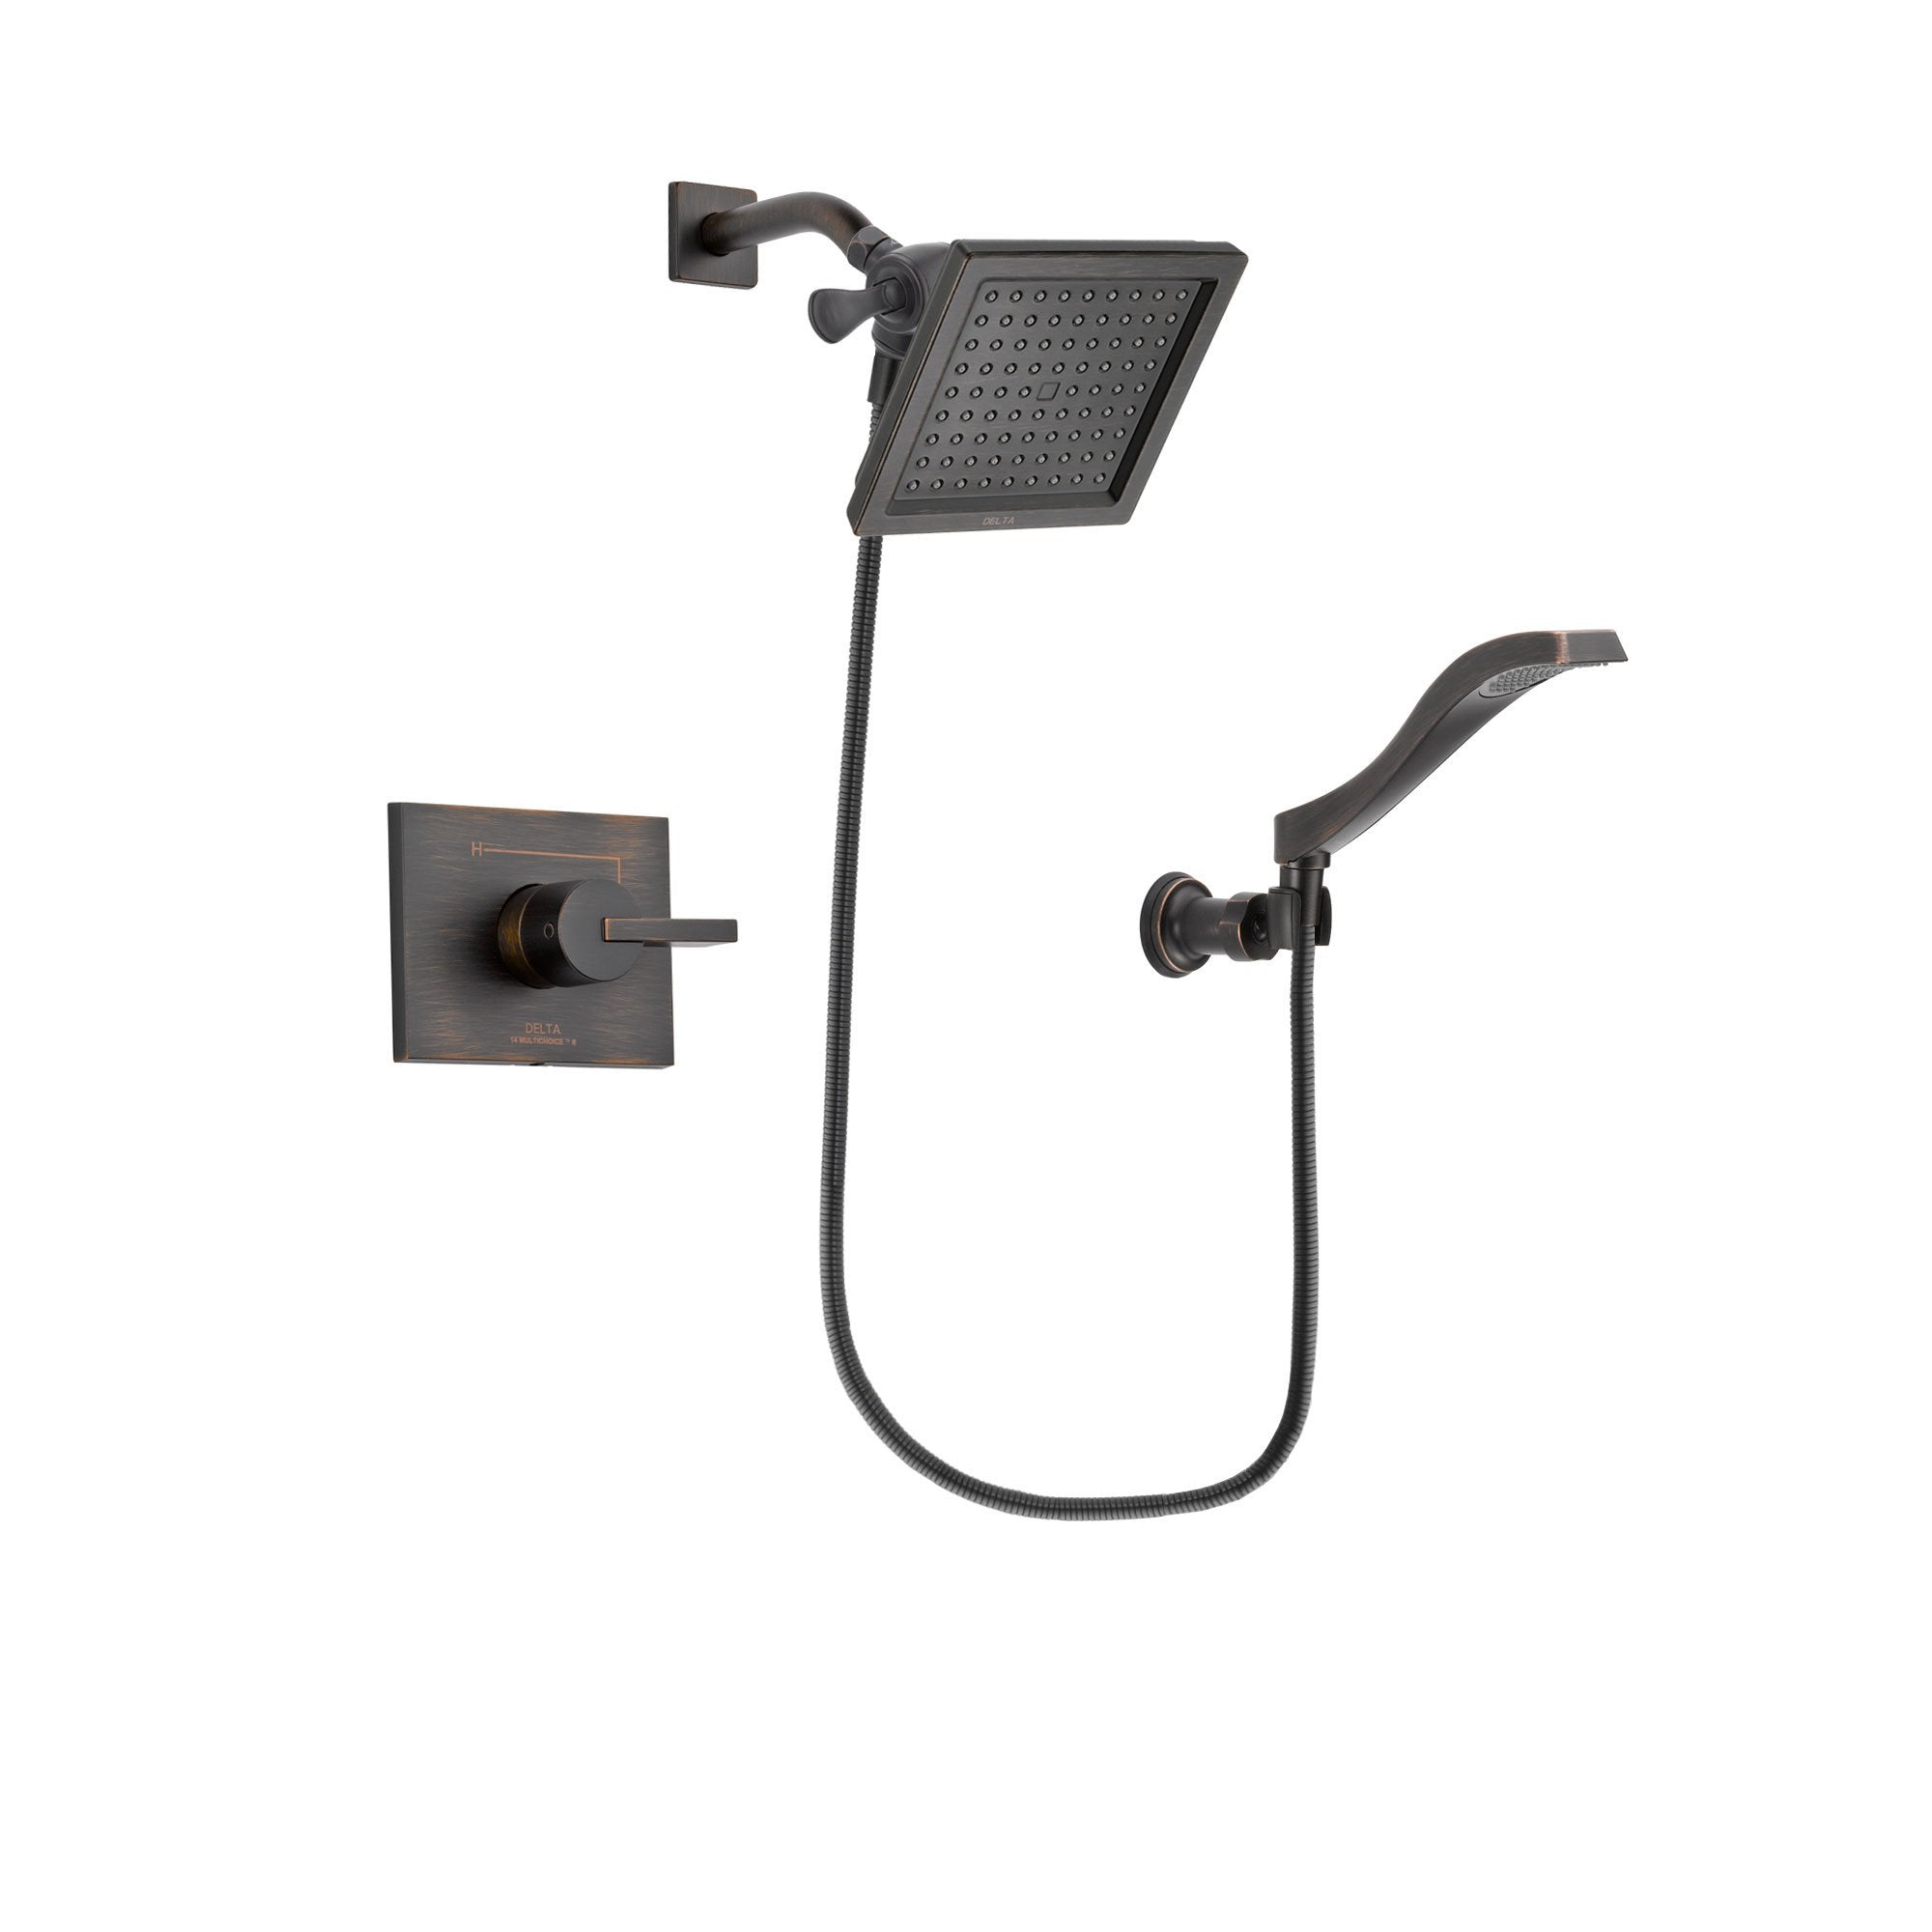 Delta Vero Venetian Bronze Shower Faucet System Package with Hand Spray DSP3228V